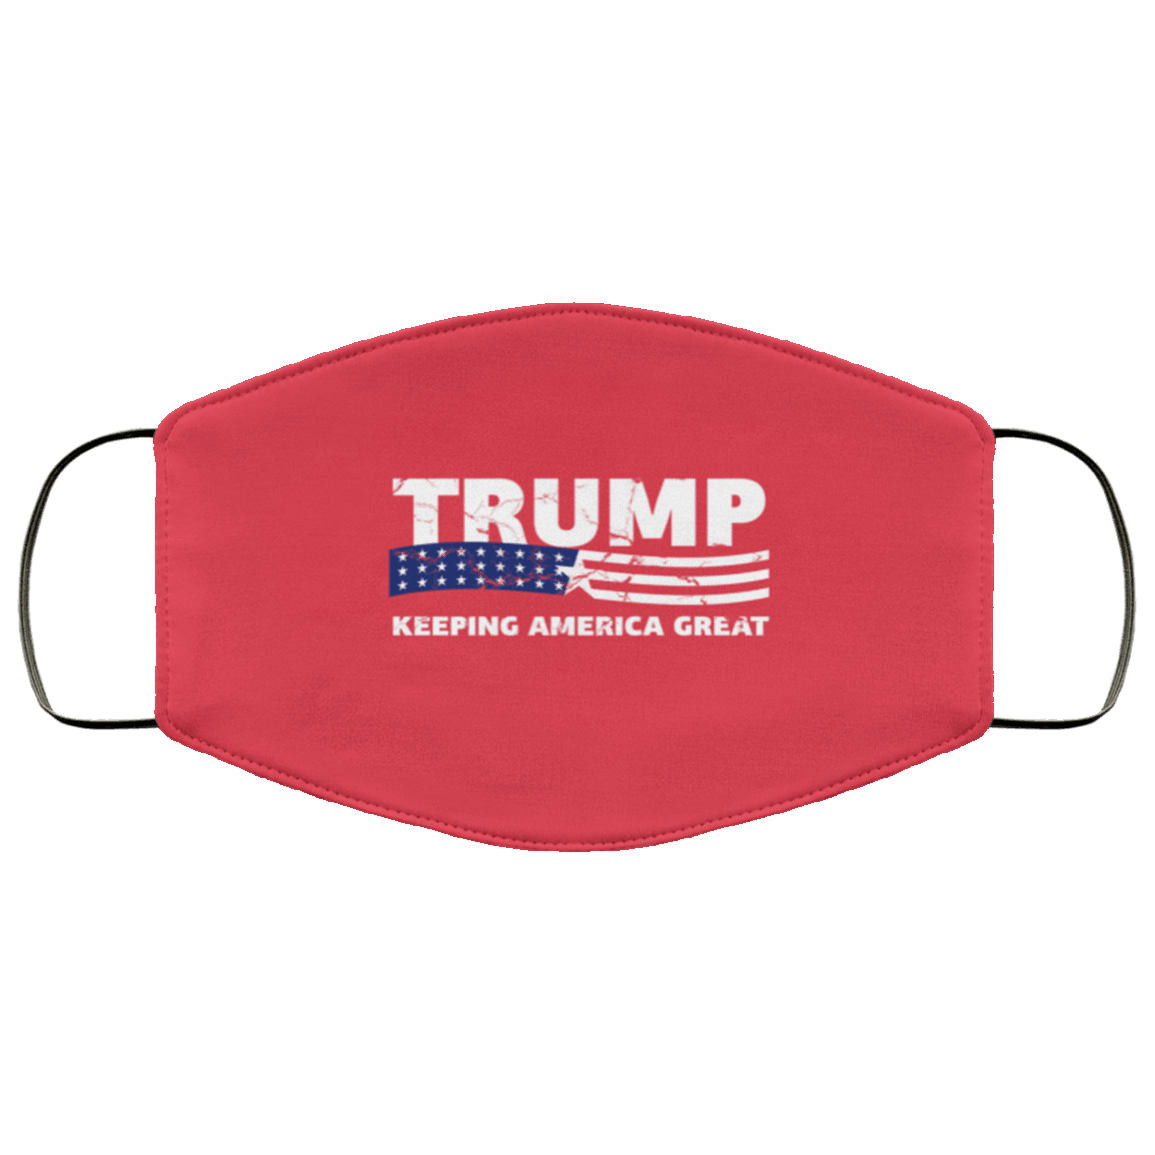 Designs by MyUtopia Shout Out:Trump Flag Keeping America Great Adult Fabric Face Mask with Elastic Ear Loops,3 Layer Fabric Face Mask / Red / White,Fabric Face Mask